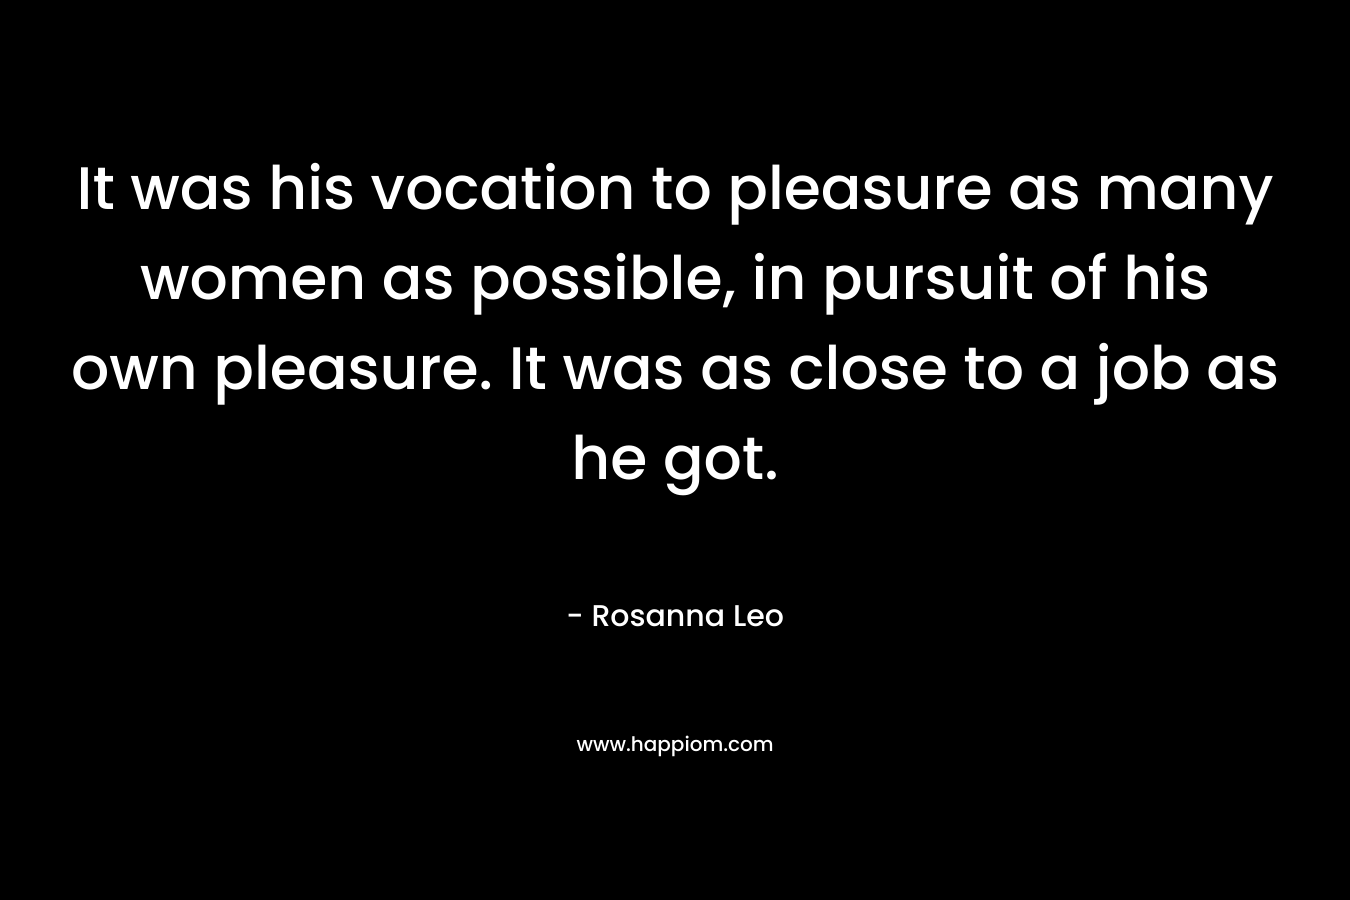 It was his vocation to pleasure as many women as possible, in pursuit of his own pleasure. It was as close to a job as he got.